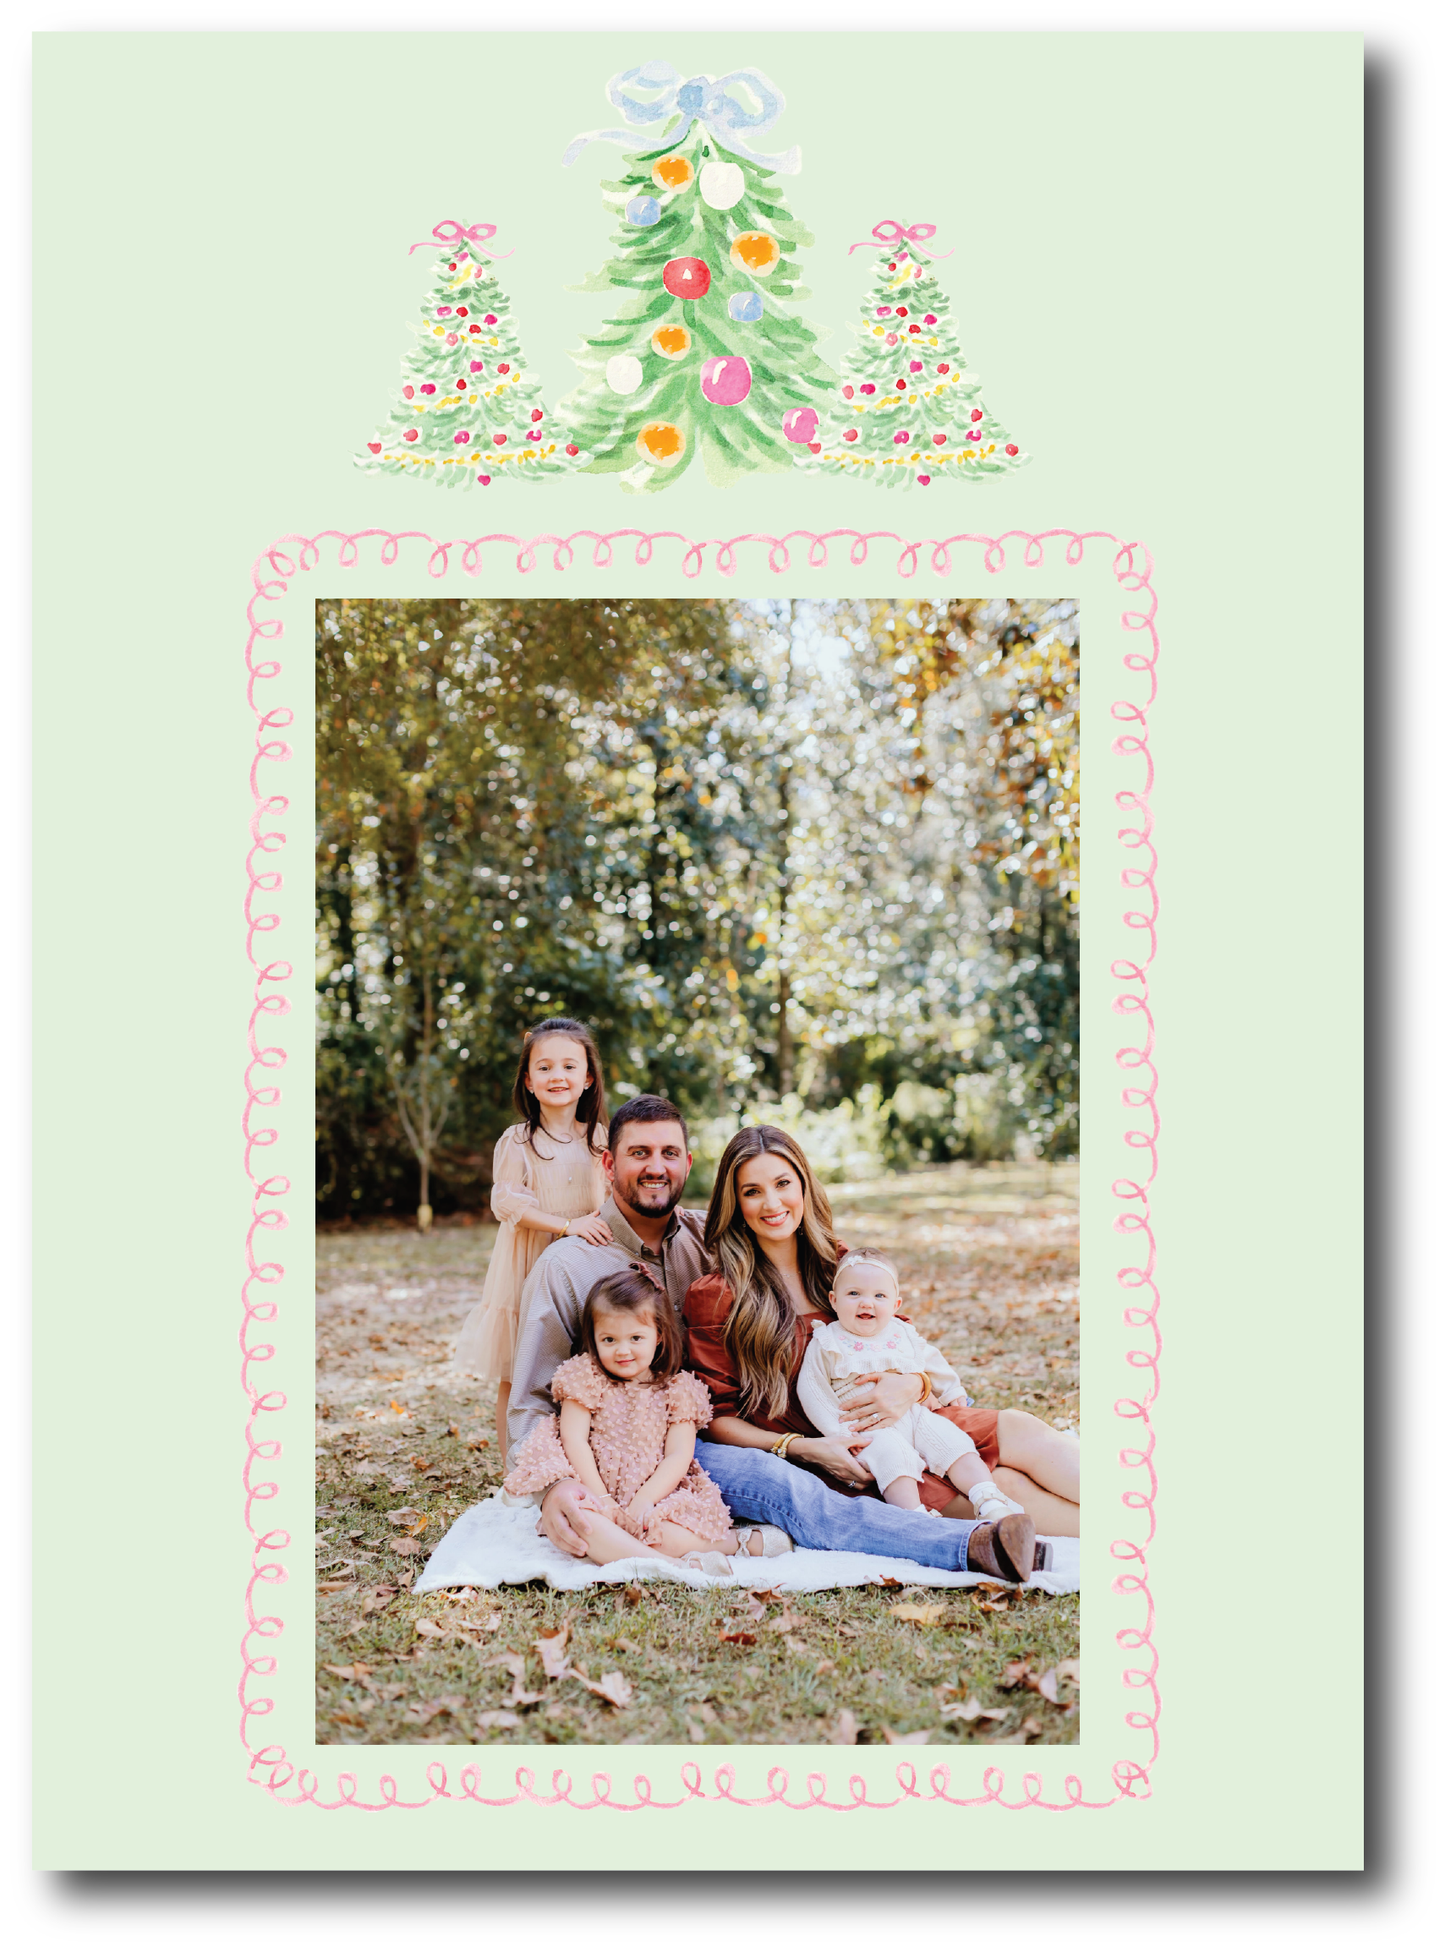 North Pole Trees Holiday Card